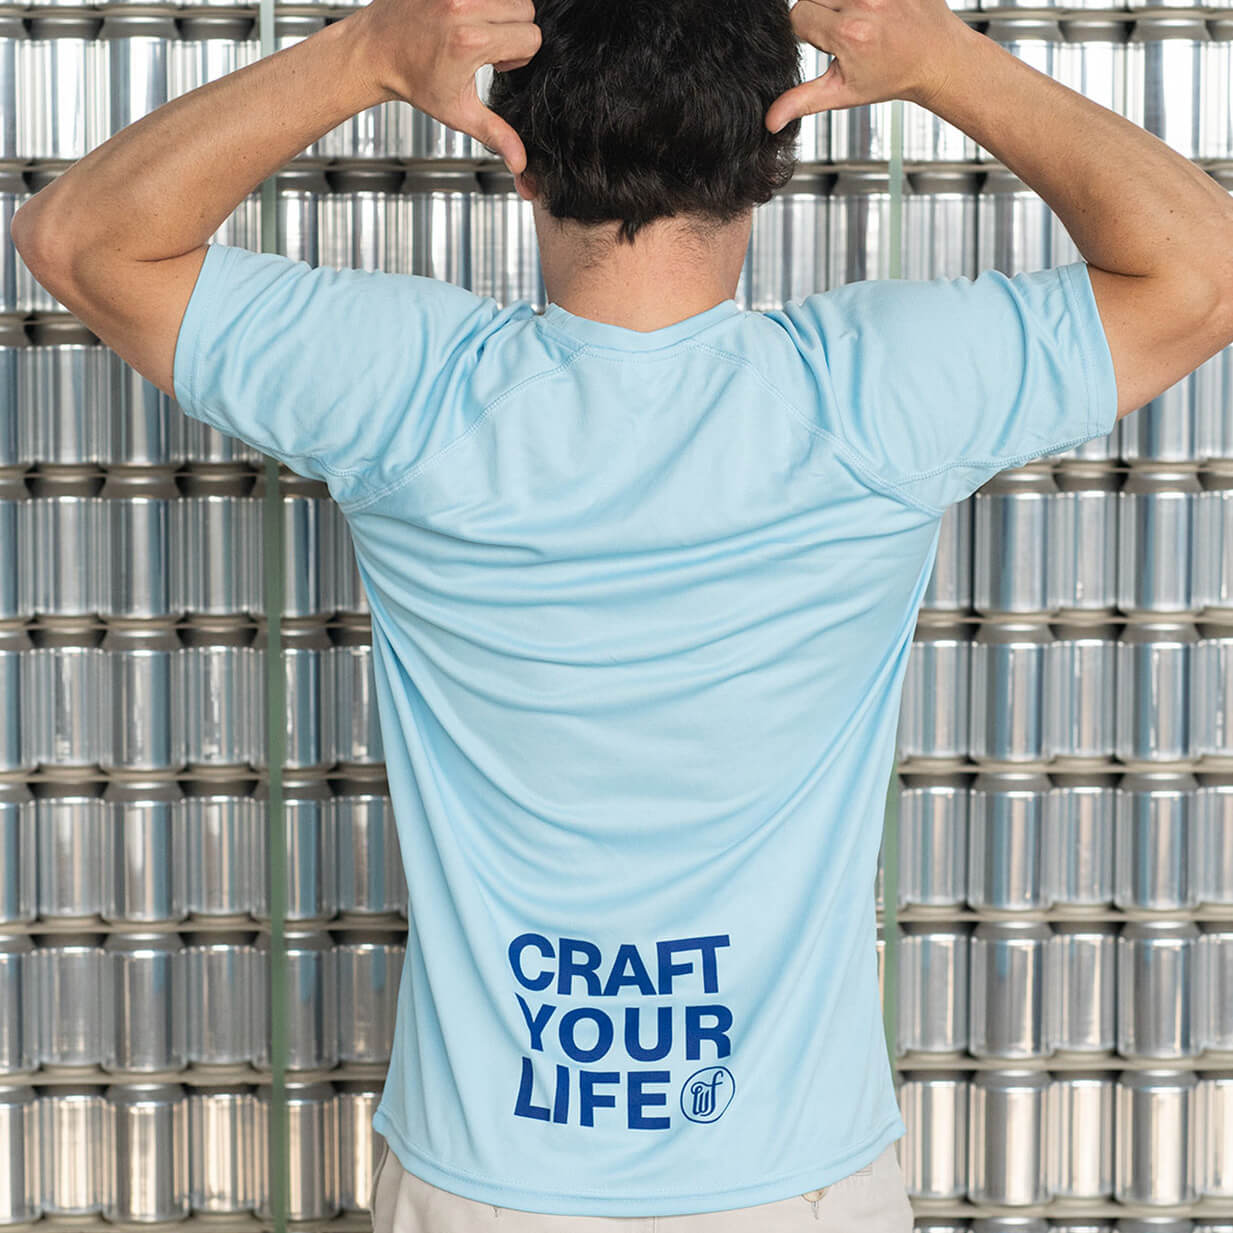 craft your life can maillot de sport whitefrontier merch